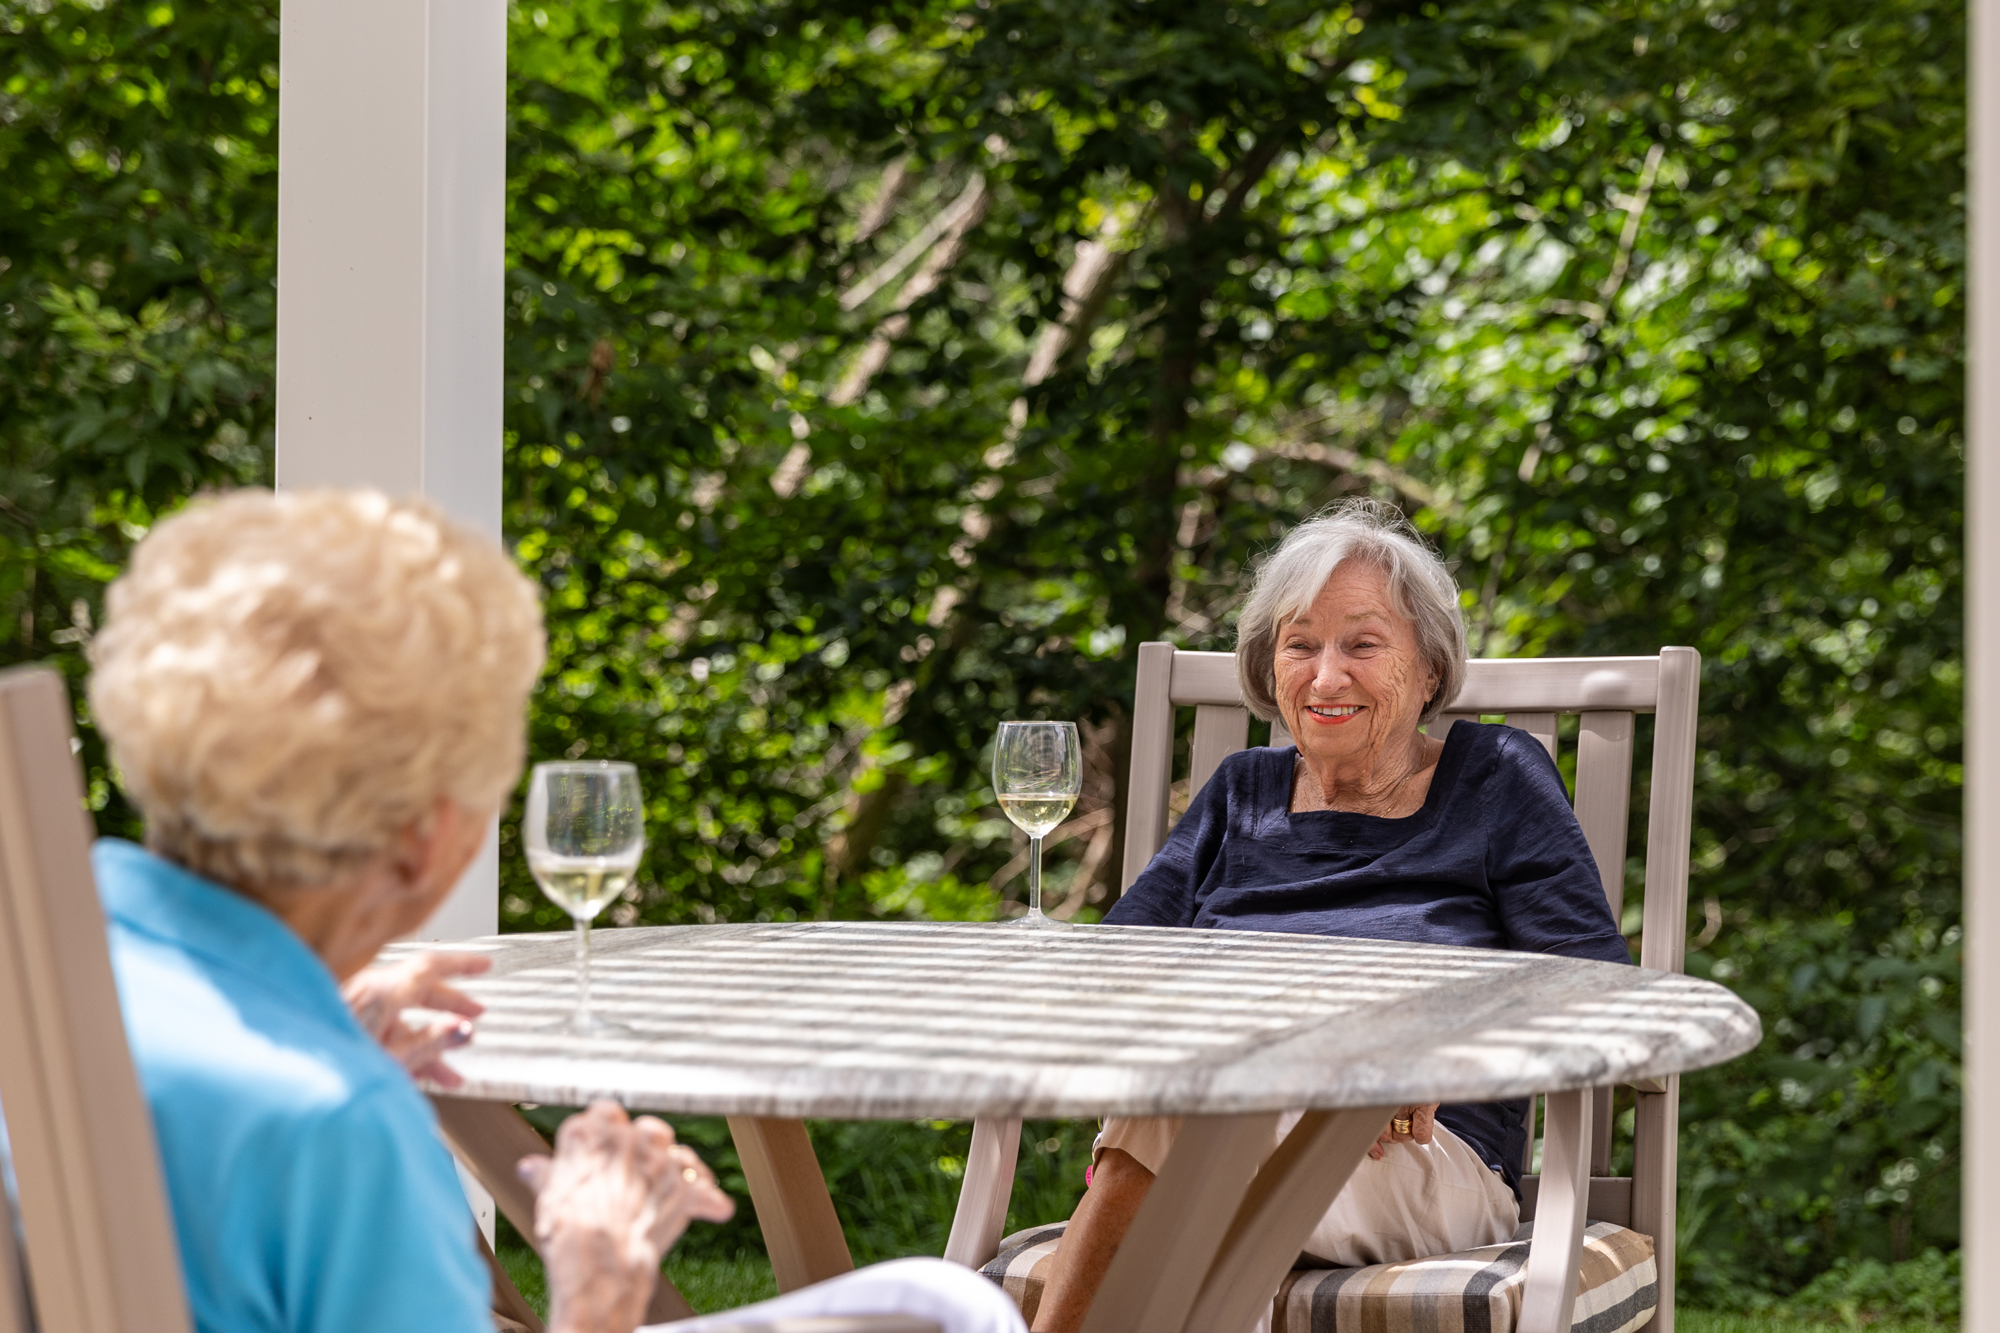 Senior Living resident reading a book in an outdoor area